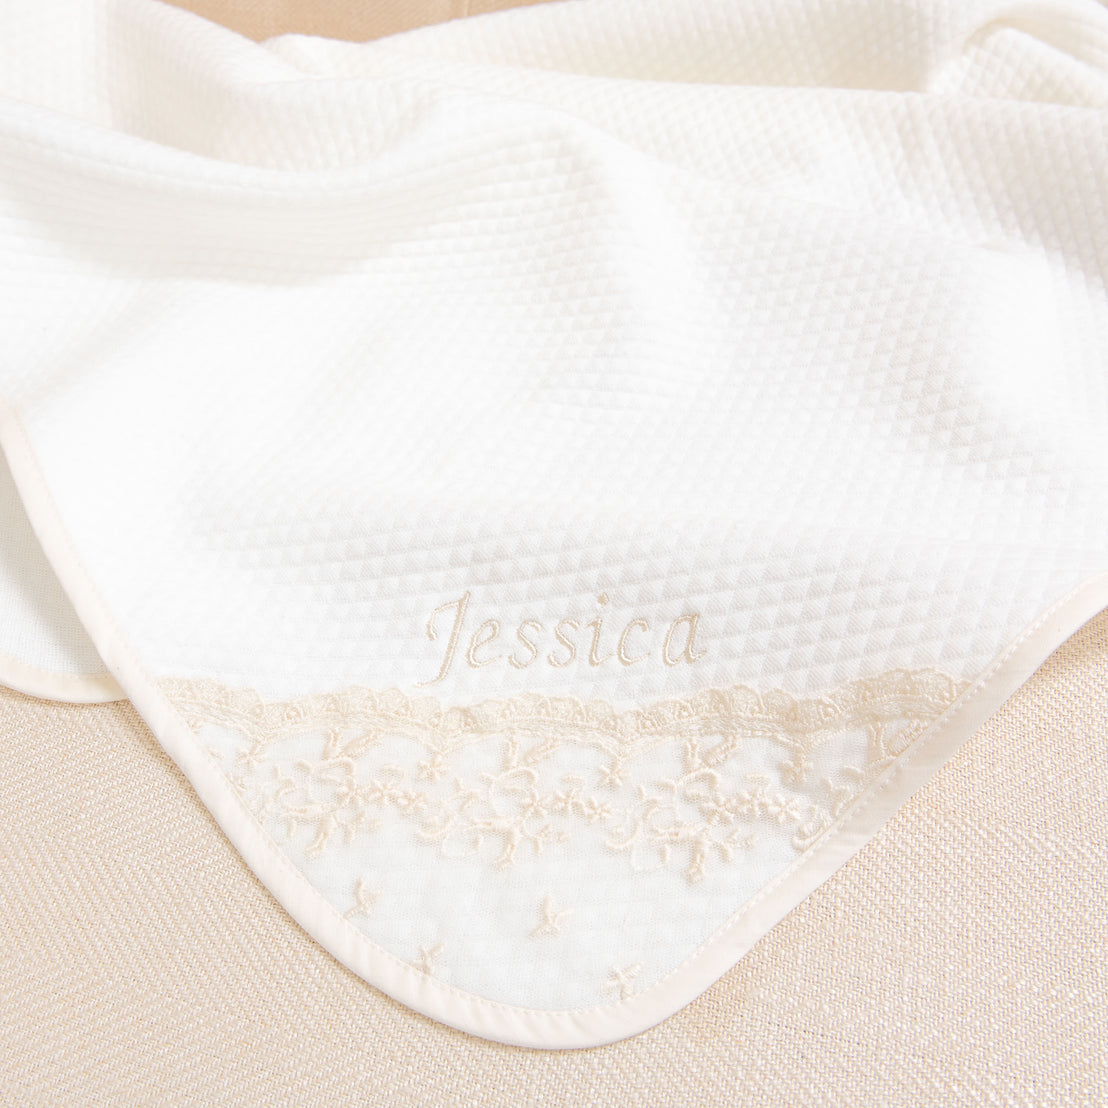 Close-up of the Jessica Personalized Blanket with the name "Jessica" embroidered in delicate script, adorned with a champagne lace trim and embroidered floral details, set against a soft beige background.